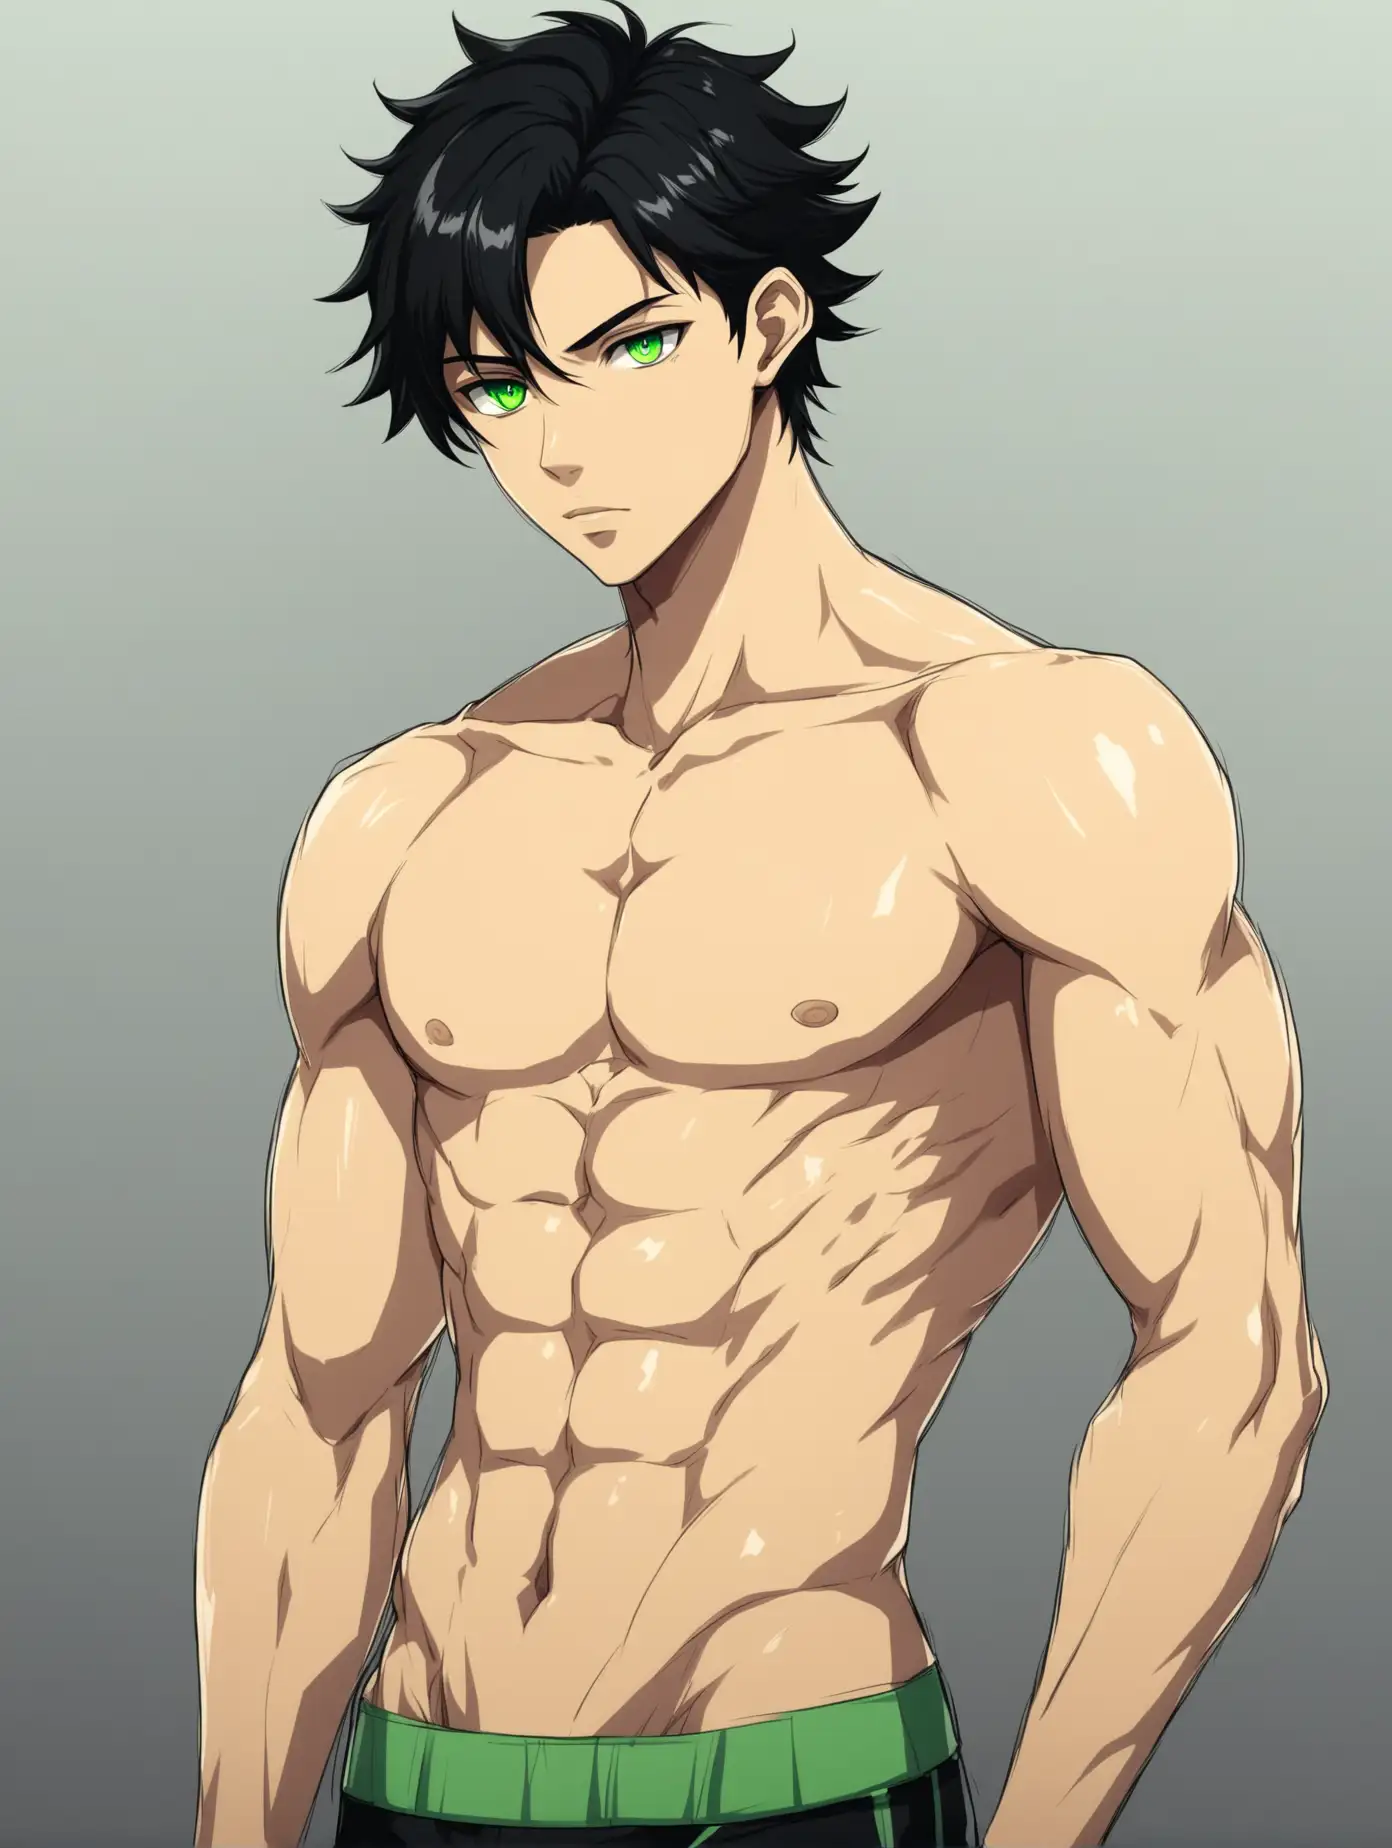 2D anime style. A young man with light skin, black hair and green eyes. fit physique. Slim sexy young male